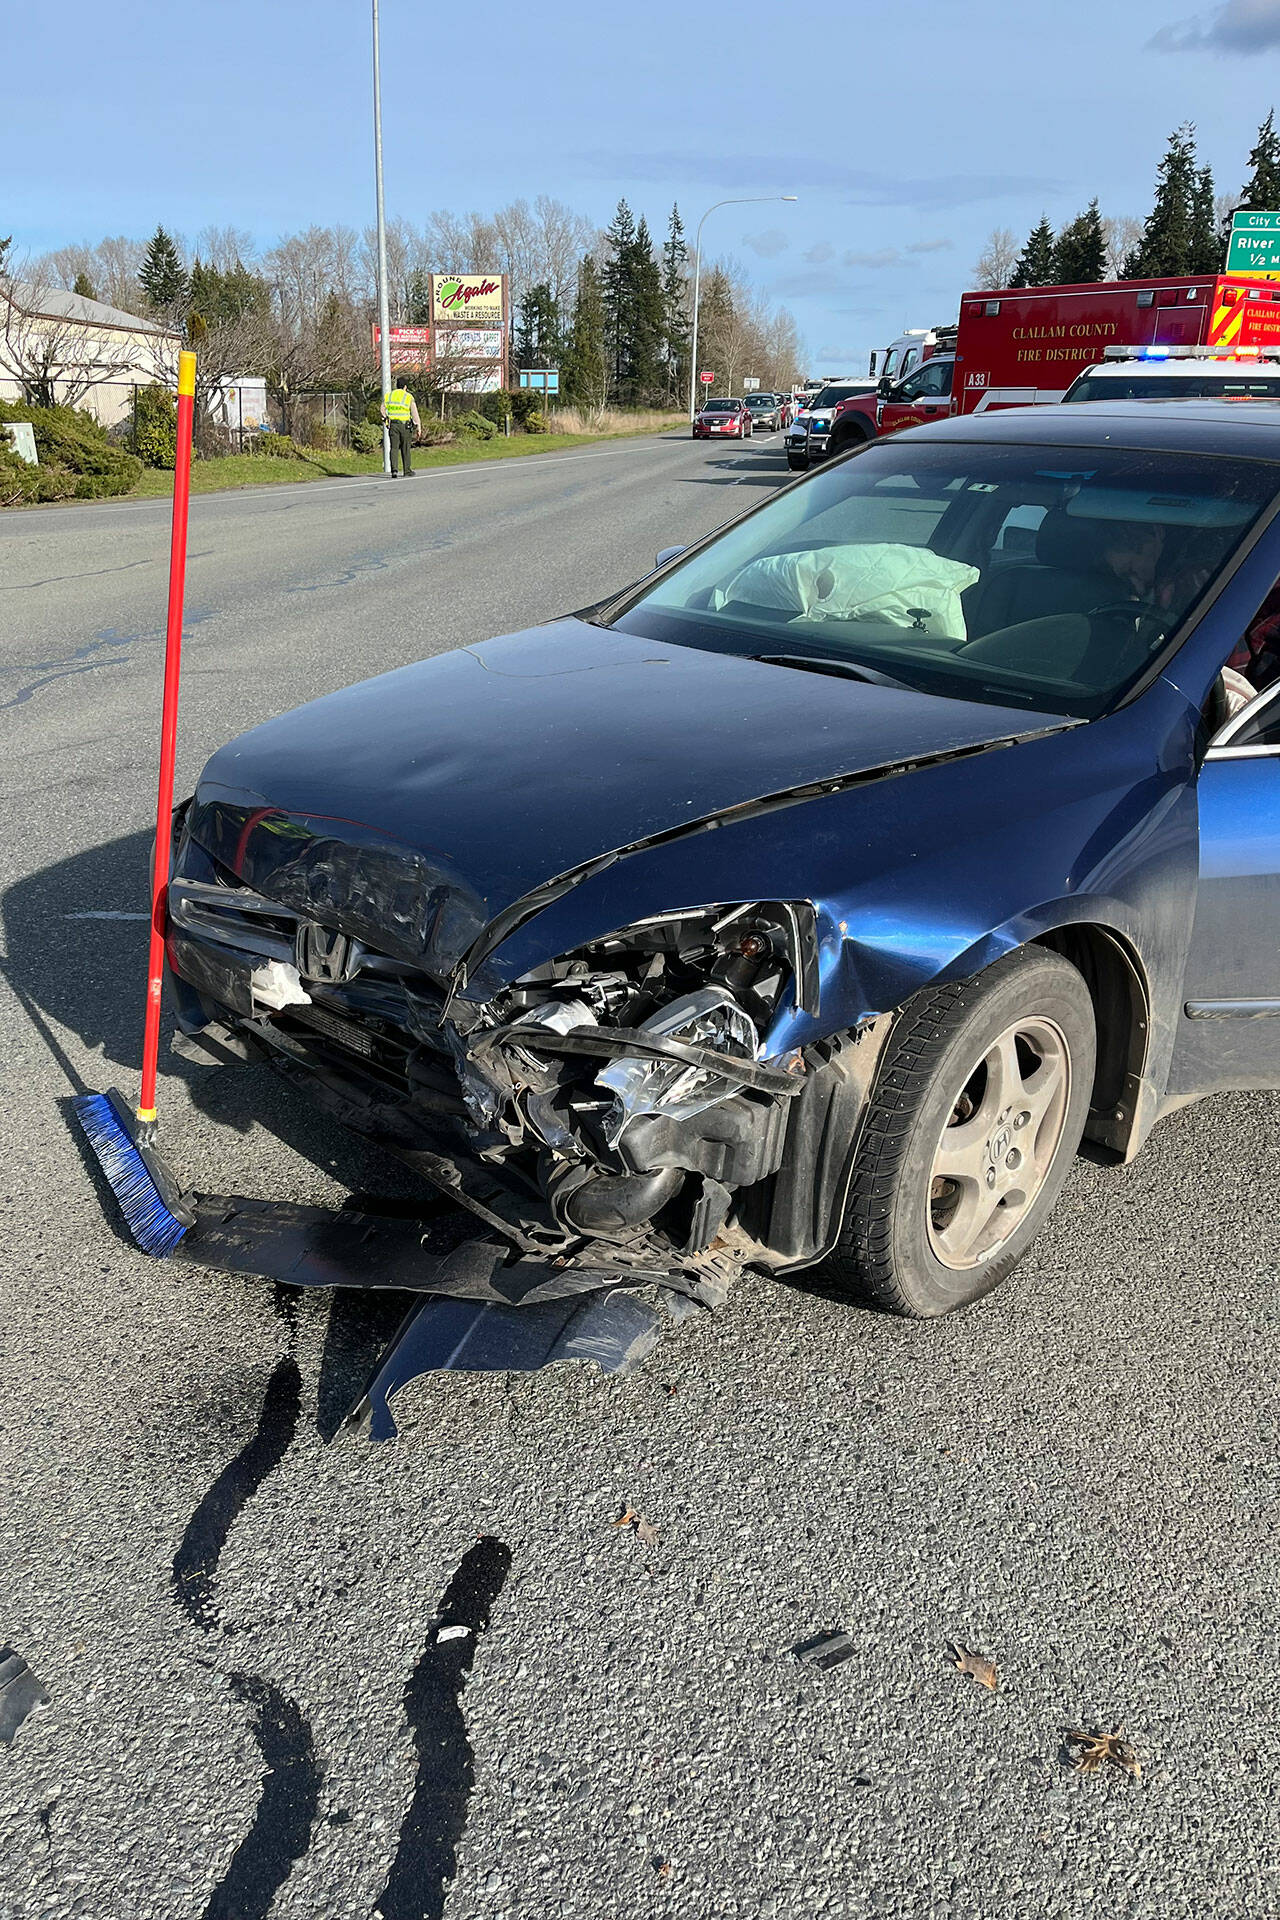 Photo courtesy Clallam County Fire District 3/ A Honda Accord struck a Subaru Crosstrek on March 13 on U.S. Highway 101 while trying to cross the westbound lane. A Sequim woman was transported with minor injuries and later released from Olympic Medical Center.